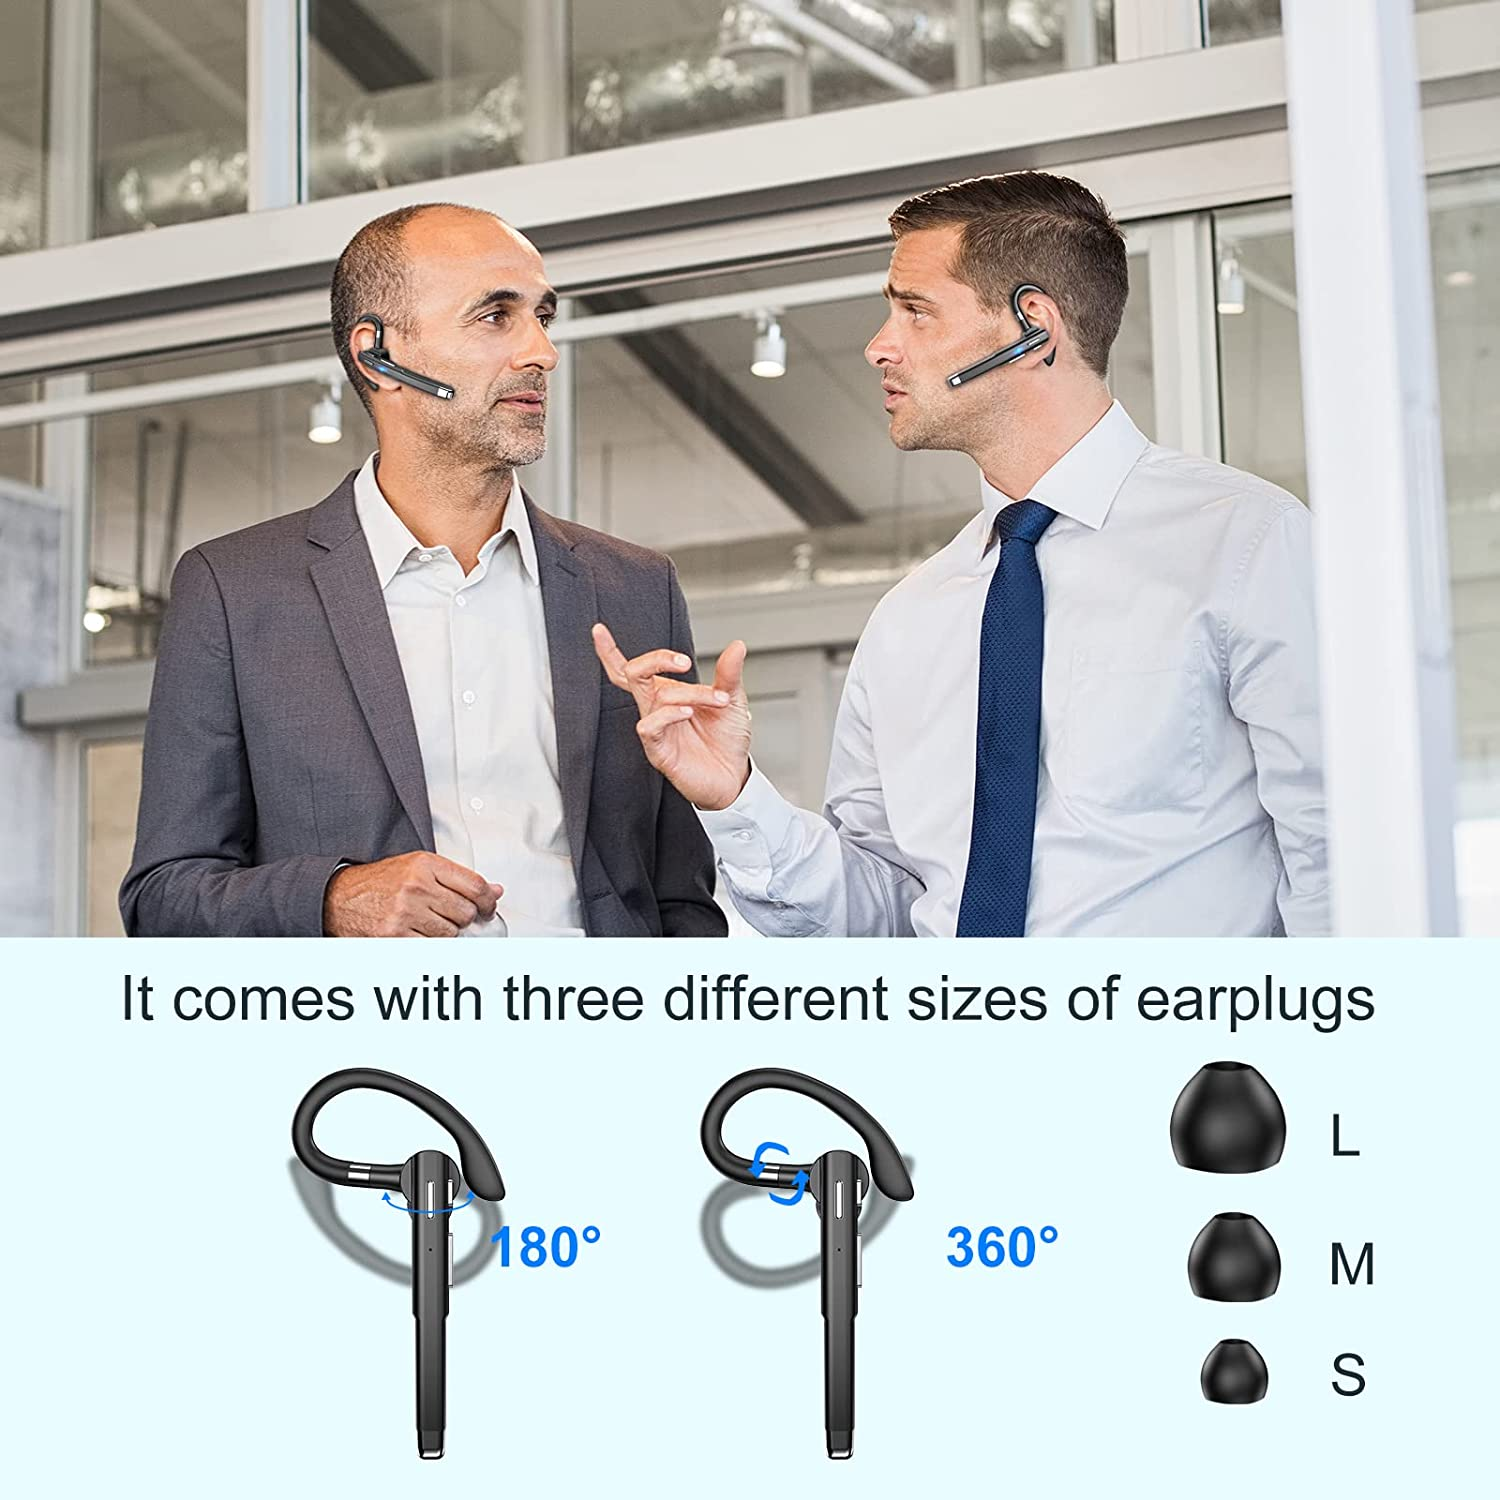 Bluetooth Earpiece for Cell Phones Bluetooth V5.1 Headset with Charging Case Hands-Free Single Ear Headset with CVC8.0 Noise Canceling Mic for Office/Driving Compatible with Android/Iphone/Laptop